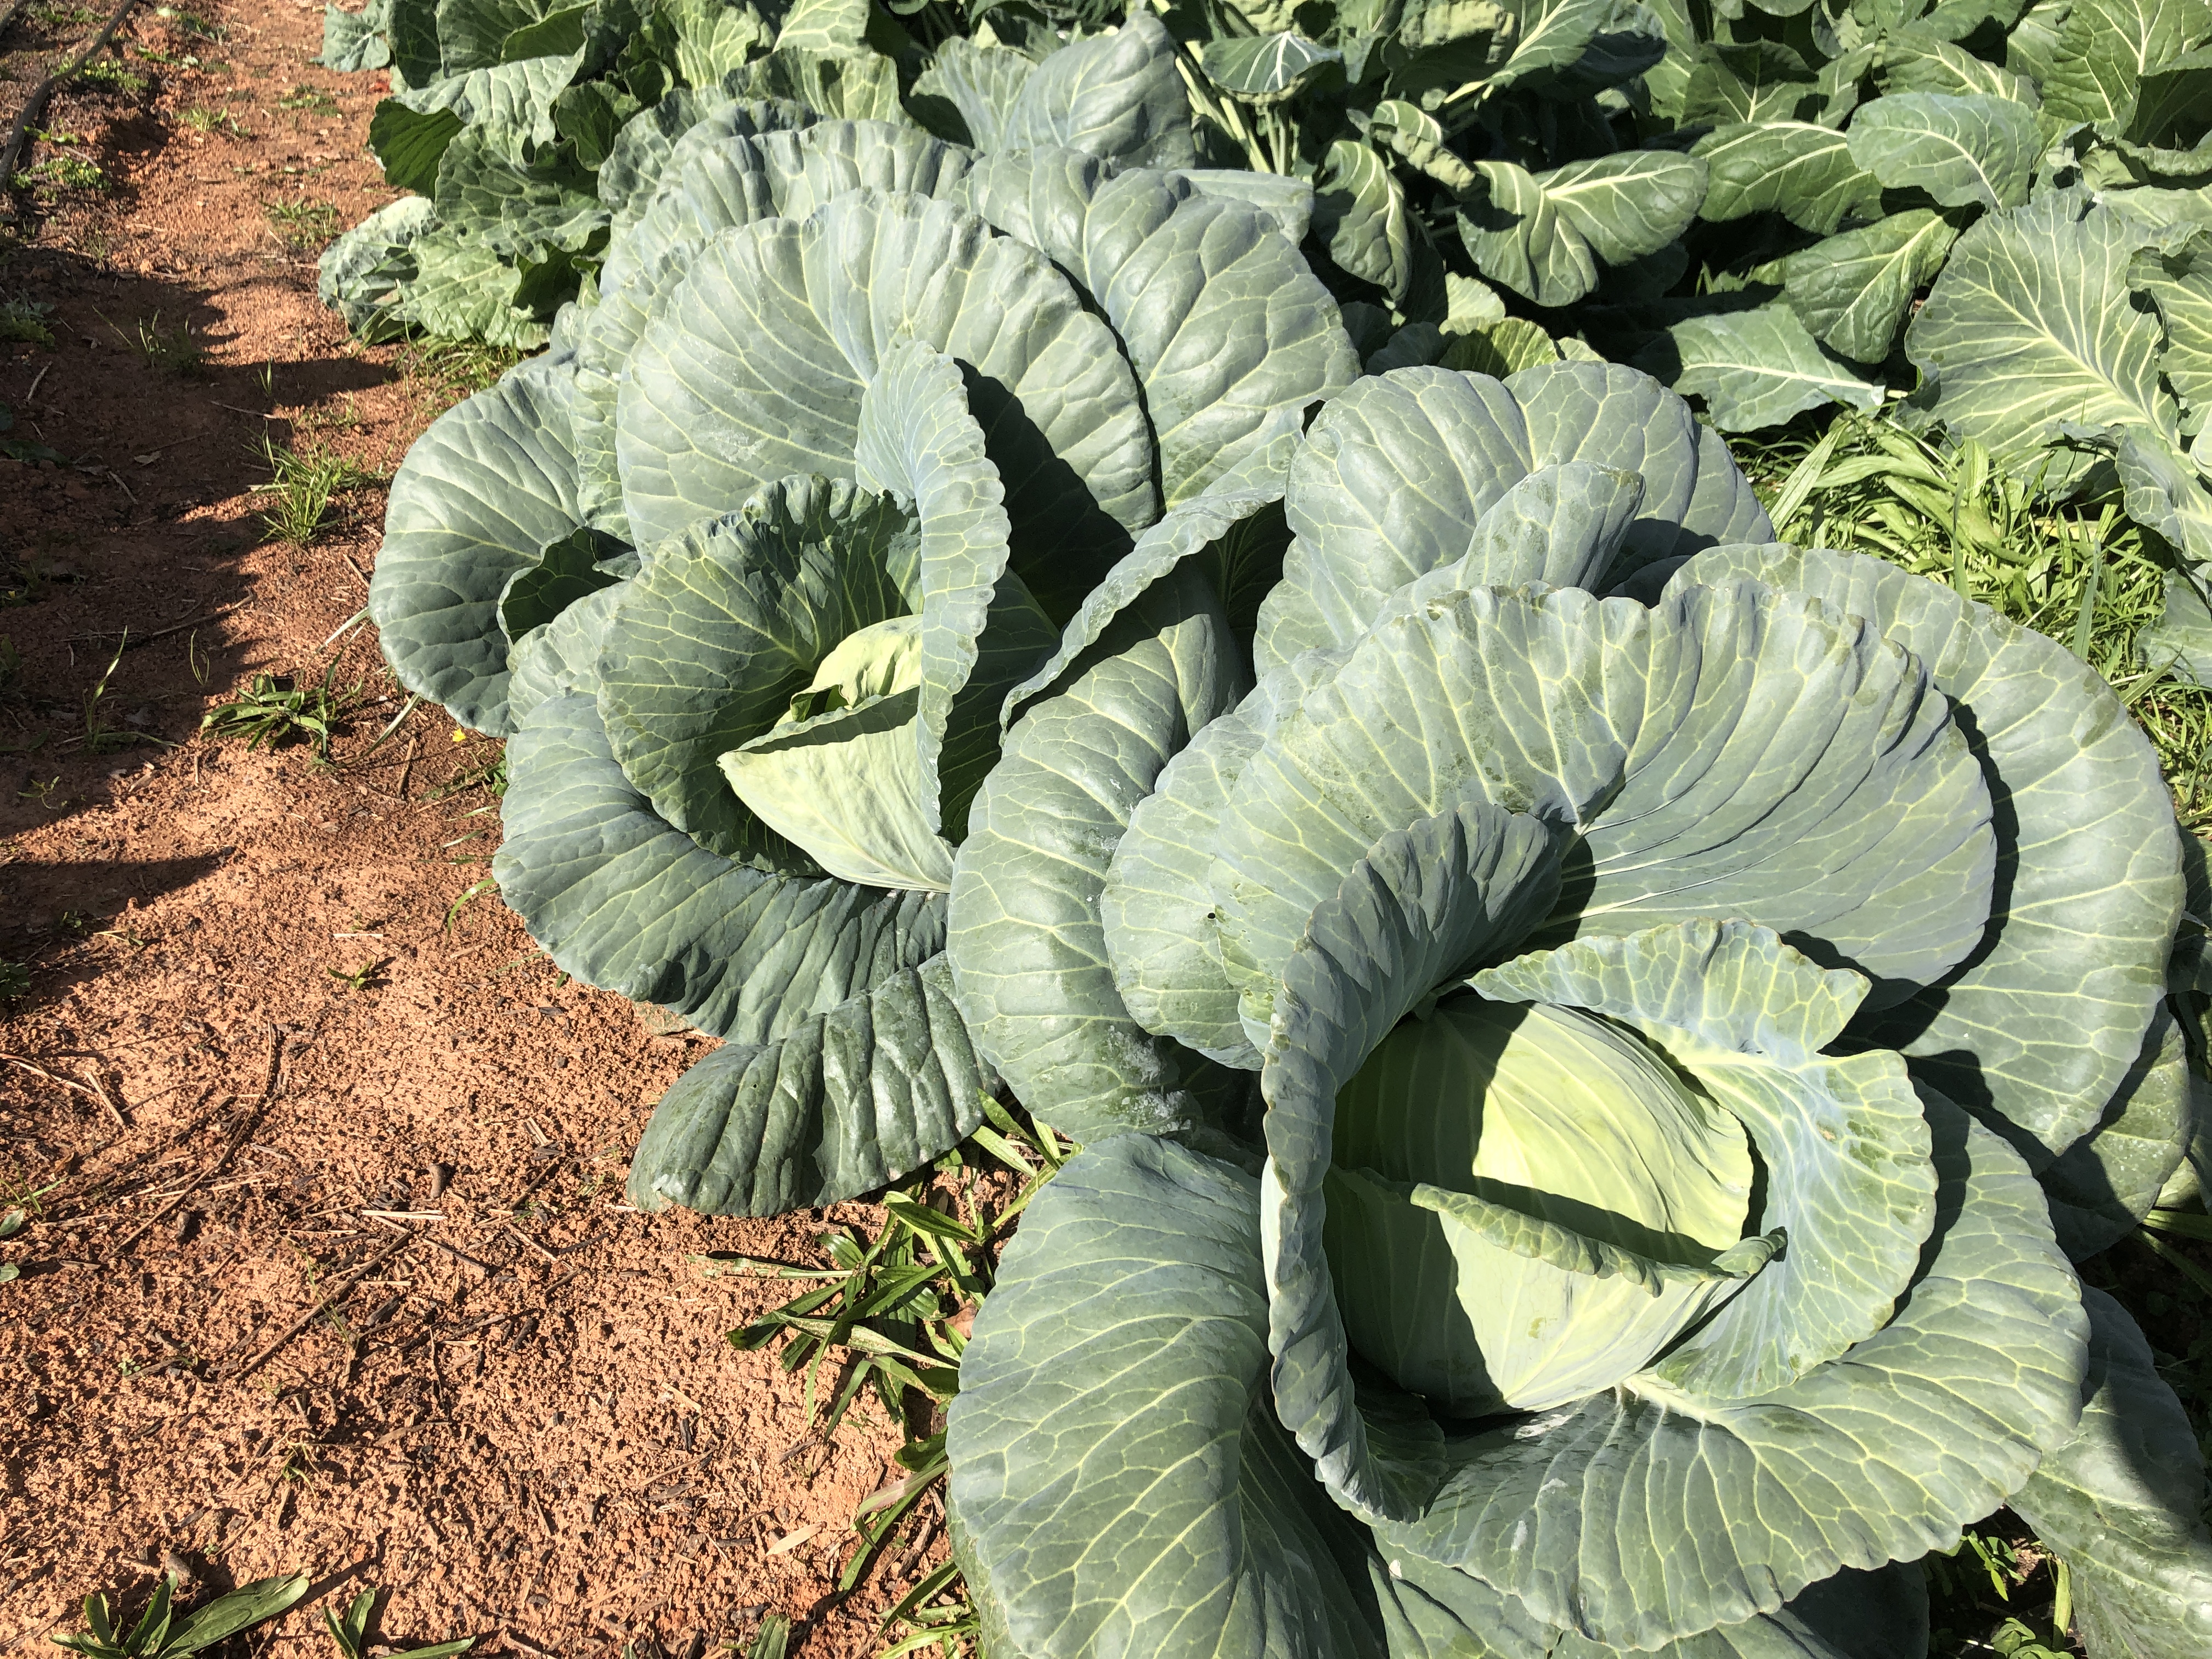 Large cabbages lay on the ground.